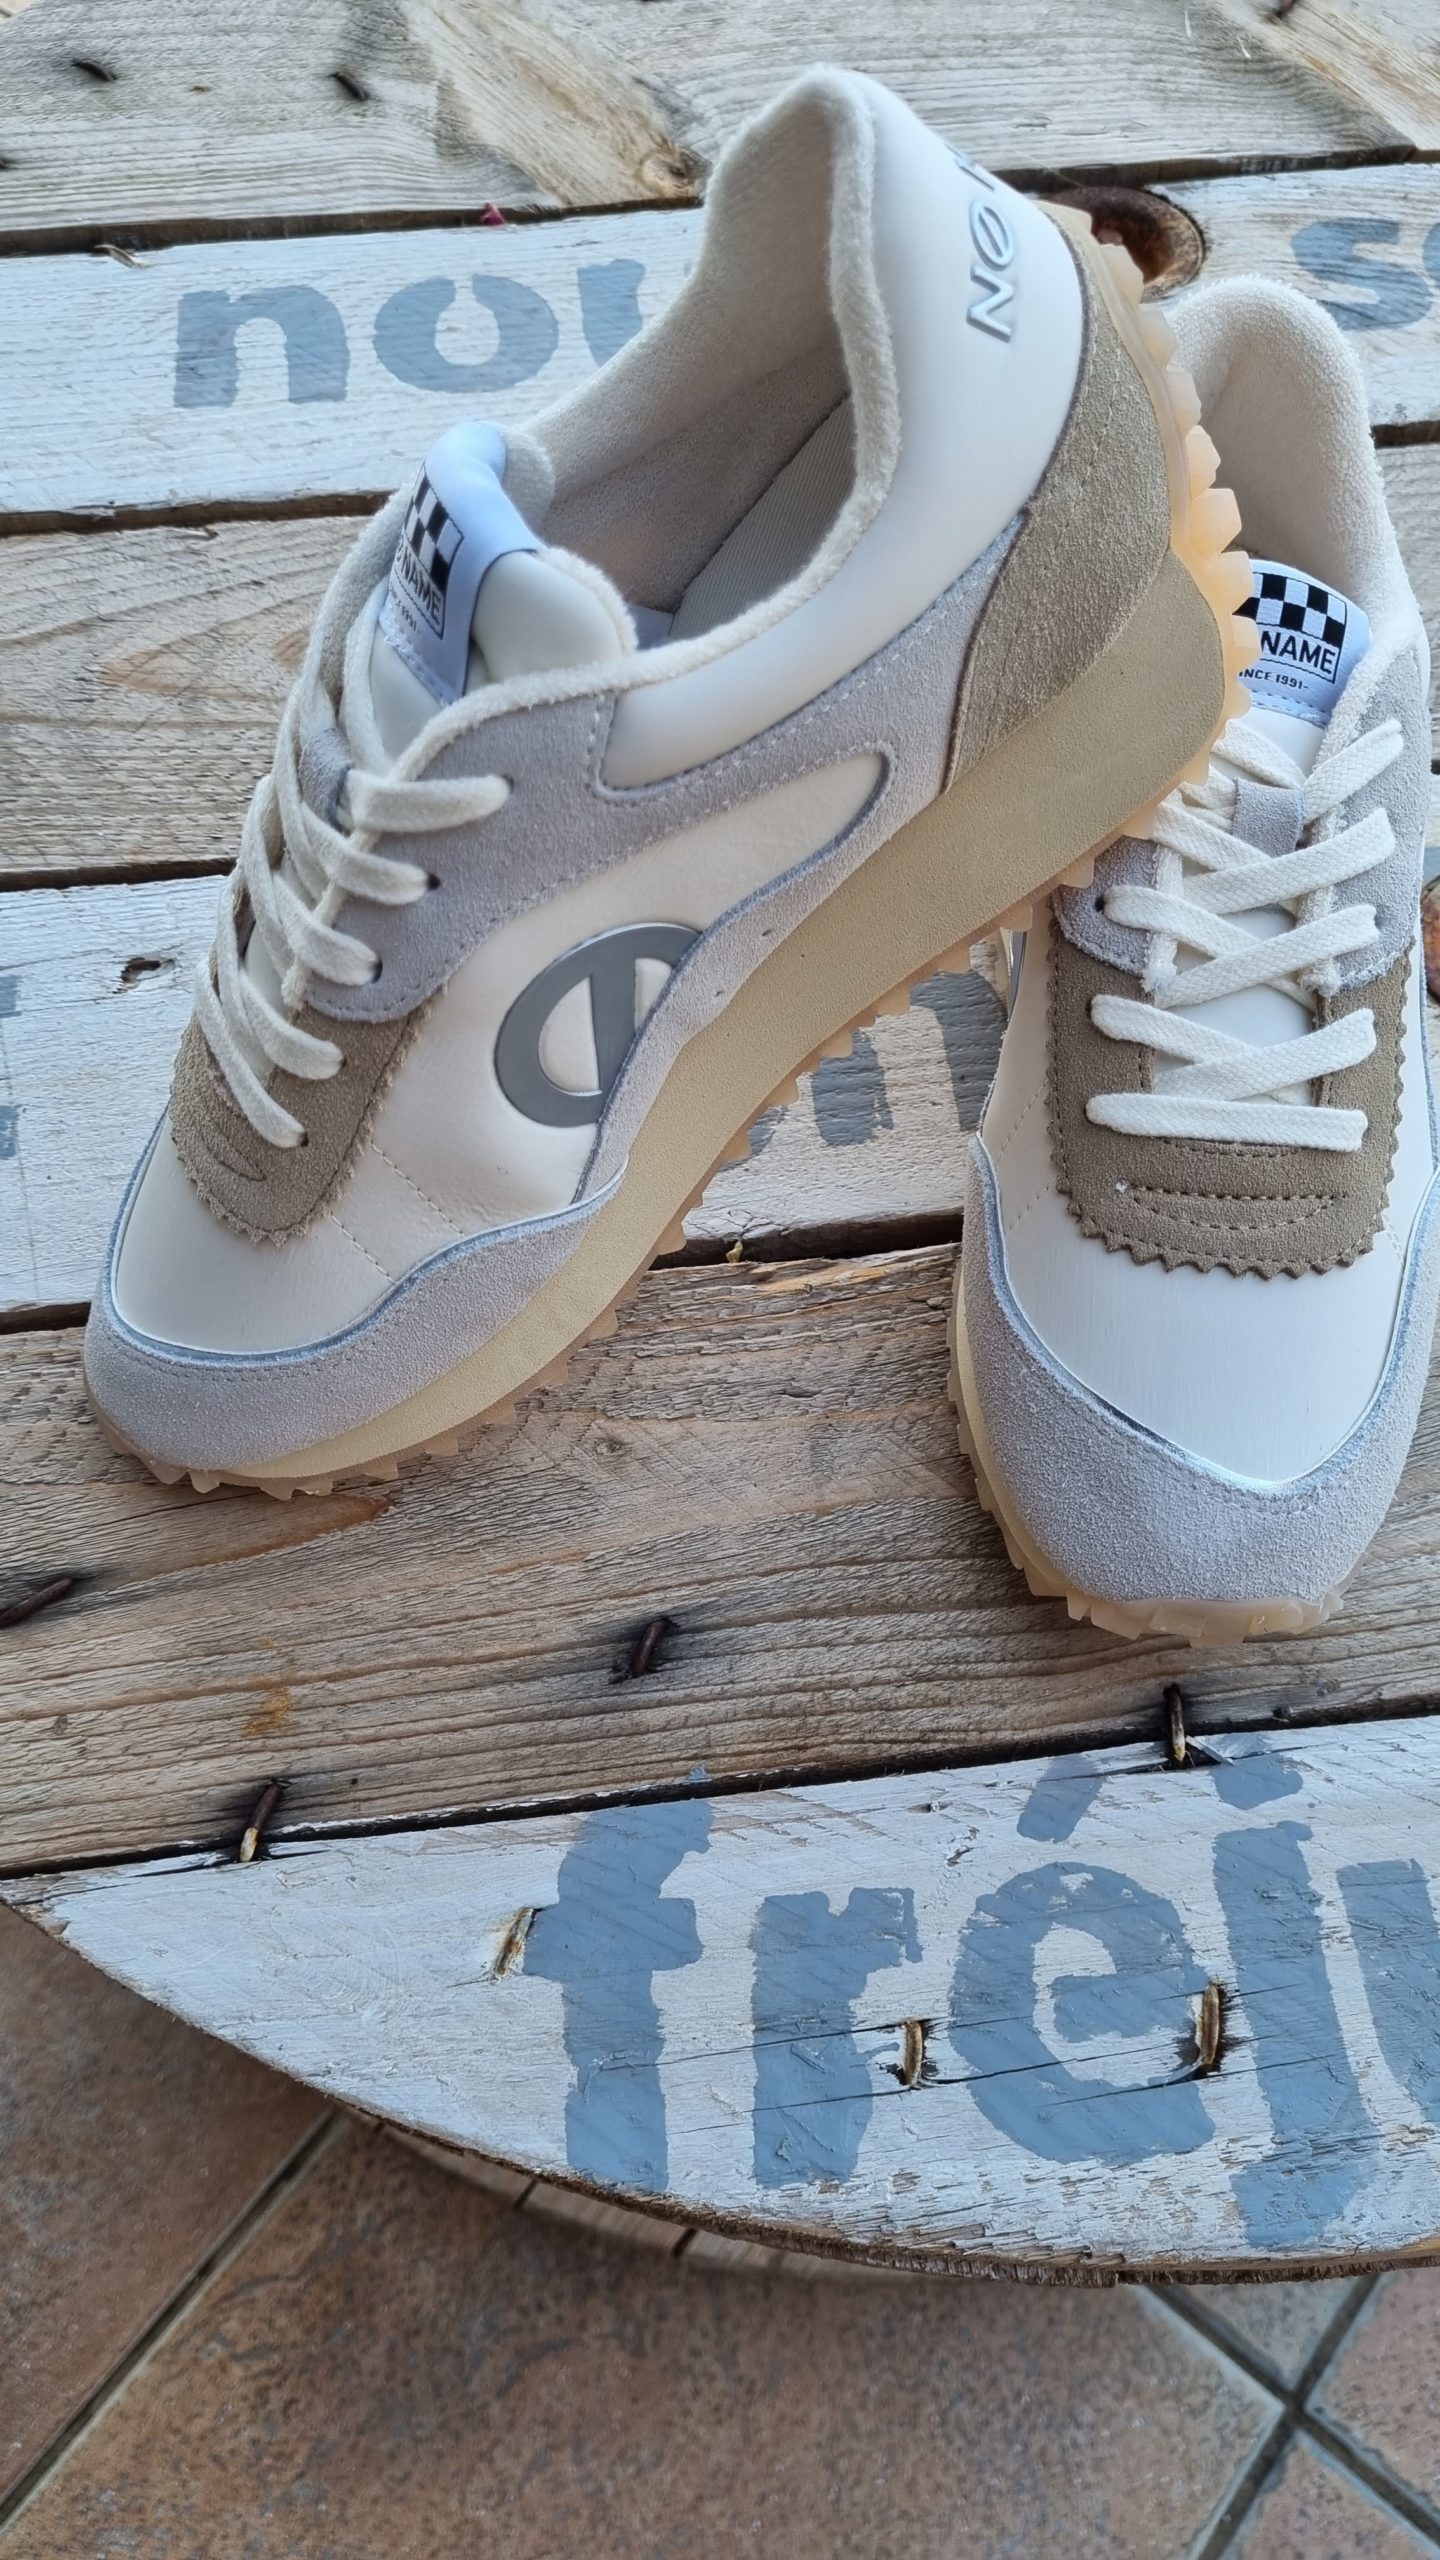 no name punky jogger beige